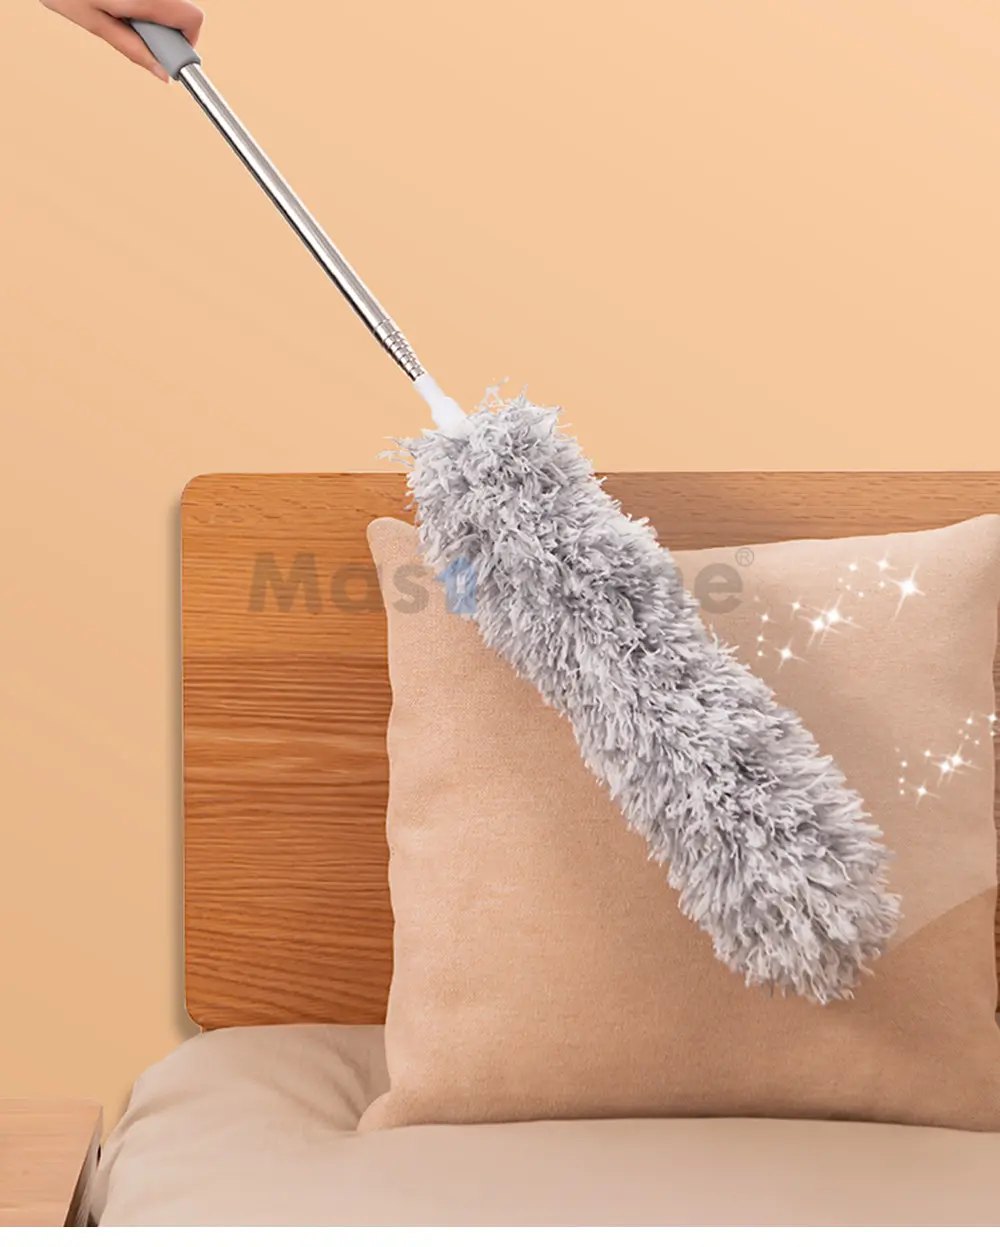 Masthome Telescopic Broom Duster Handle Detachable Flexible Feather Microfiber Cleaning Duster